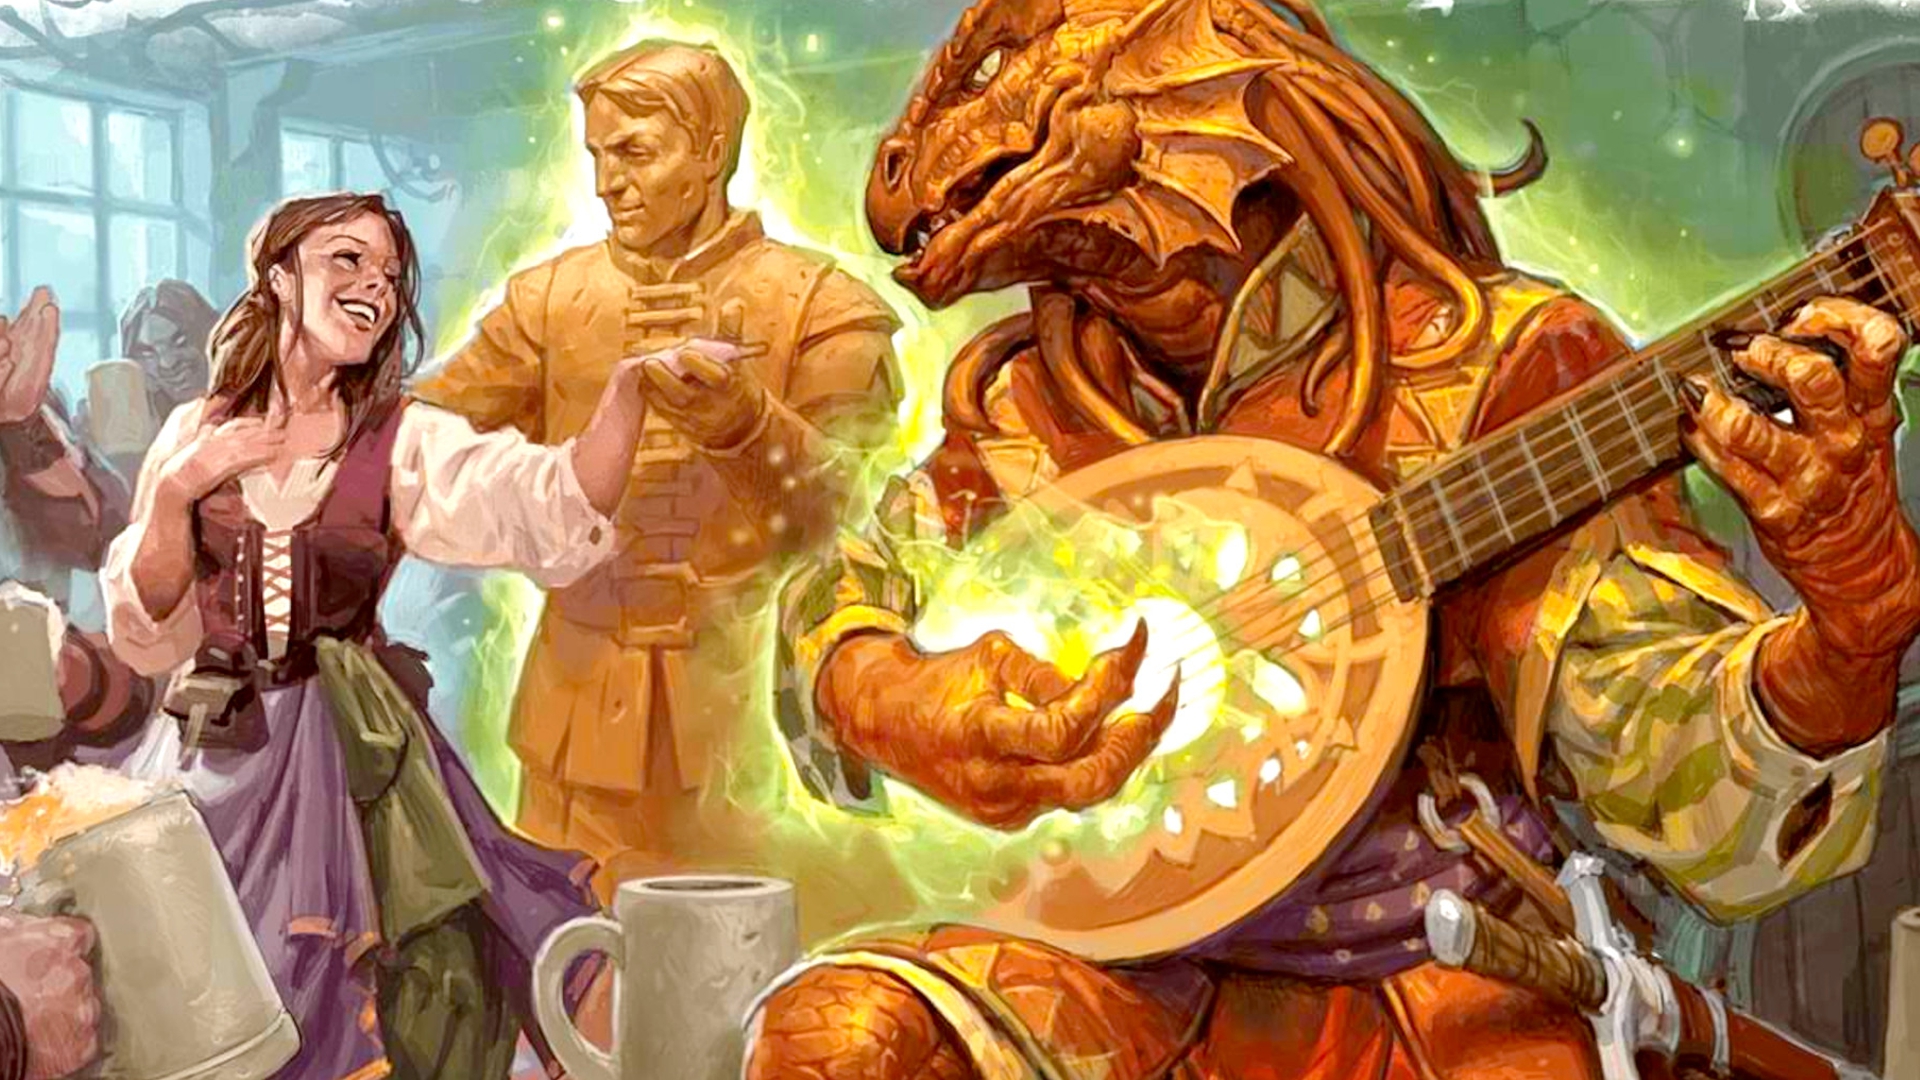 DnD cantrips 5e - Wizards of the Coast art of a Dragonborn Bard casting Minor Illusion while playing a lute